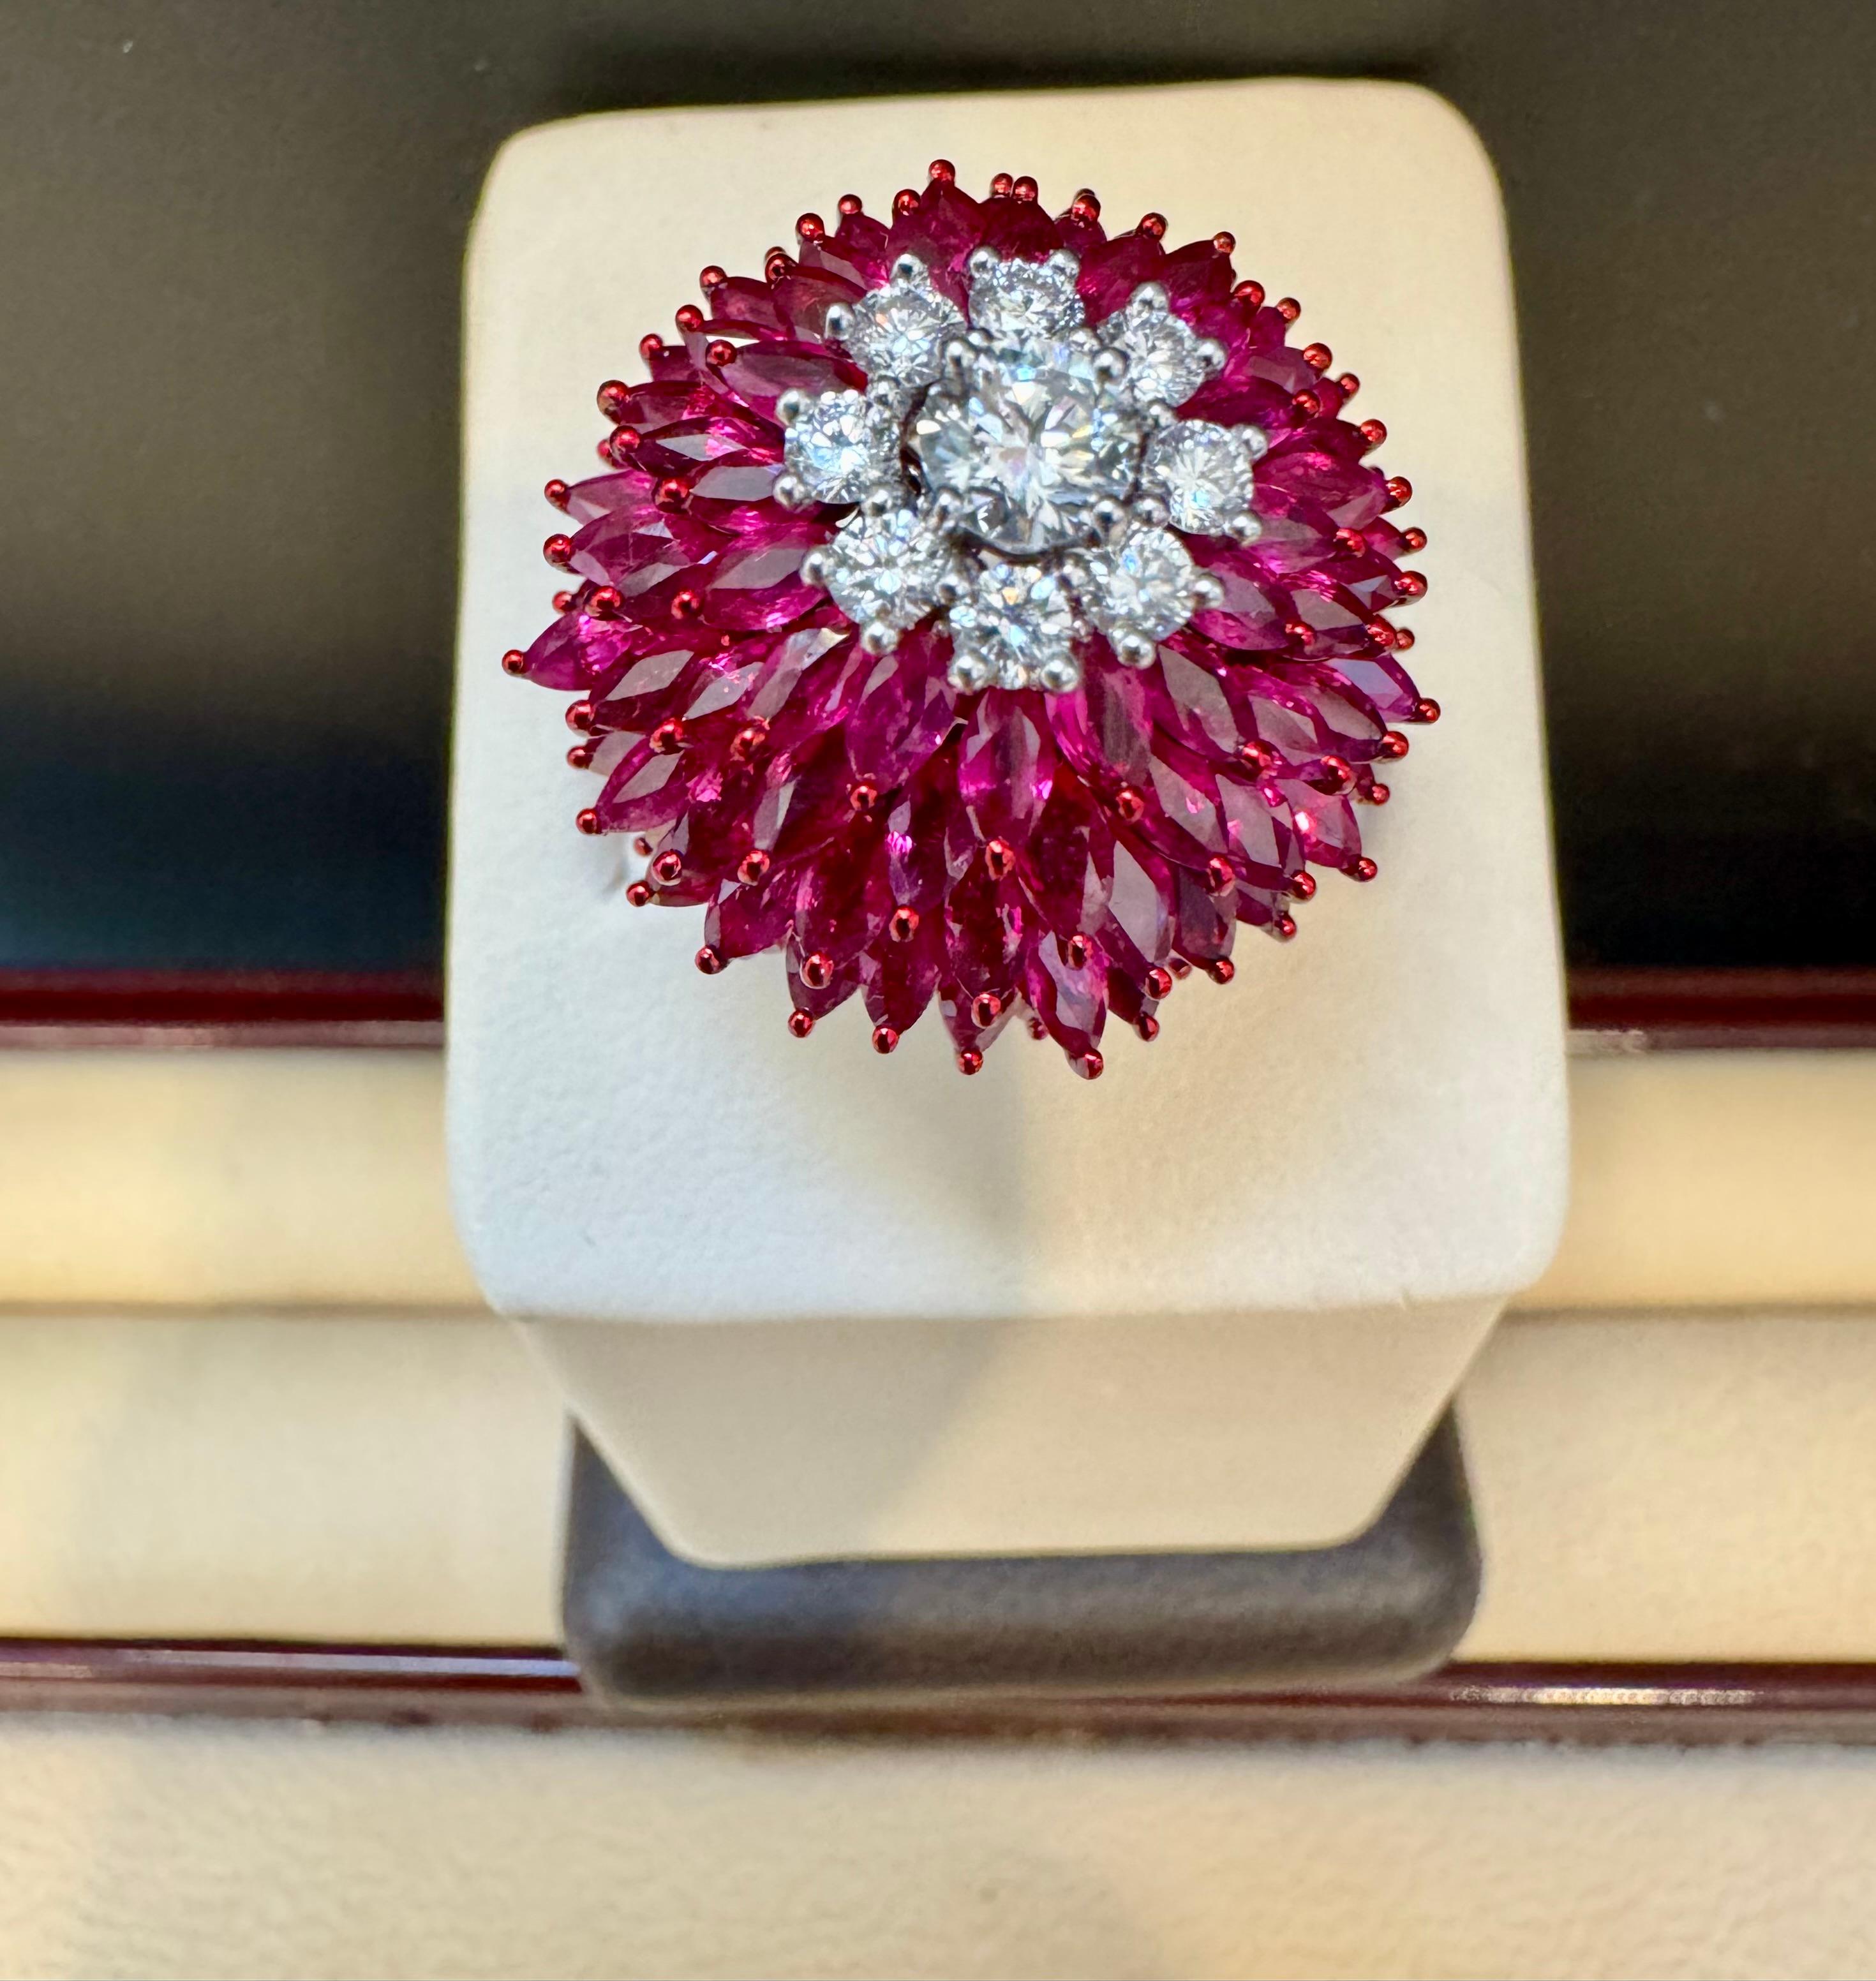 12 Ct Natural Marquis Ruby & 0.75 Ct Diamond 18 Kt White Gold Ball Ring Size 6
Introducing our exquisite 18 Karat Gold Ring, featuring a stunning 12 carat natural Marquise Ruby and approximately 0.75 carats of brilliant cut diamonds. This ring is a